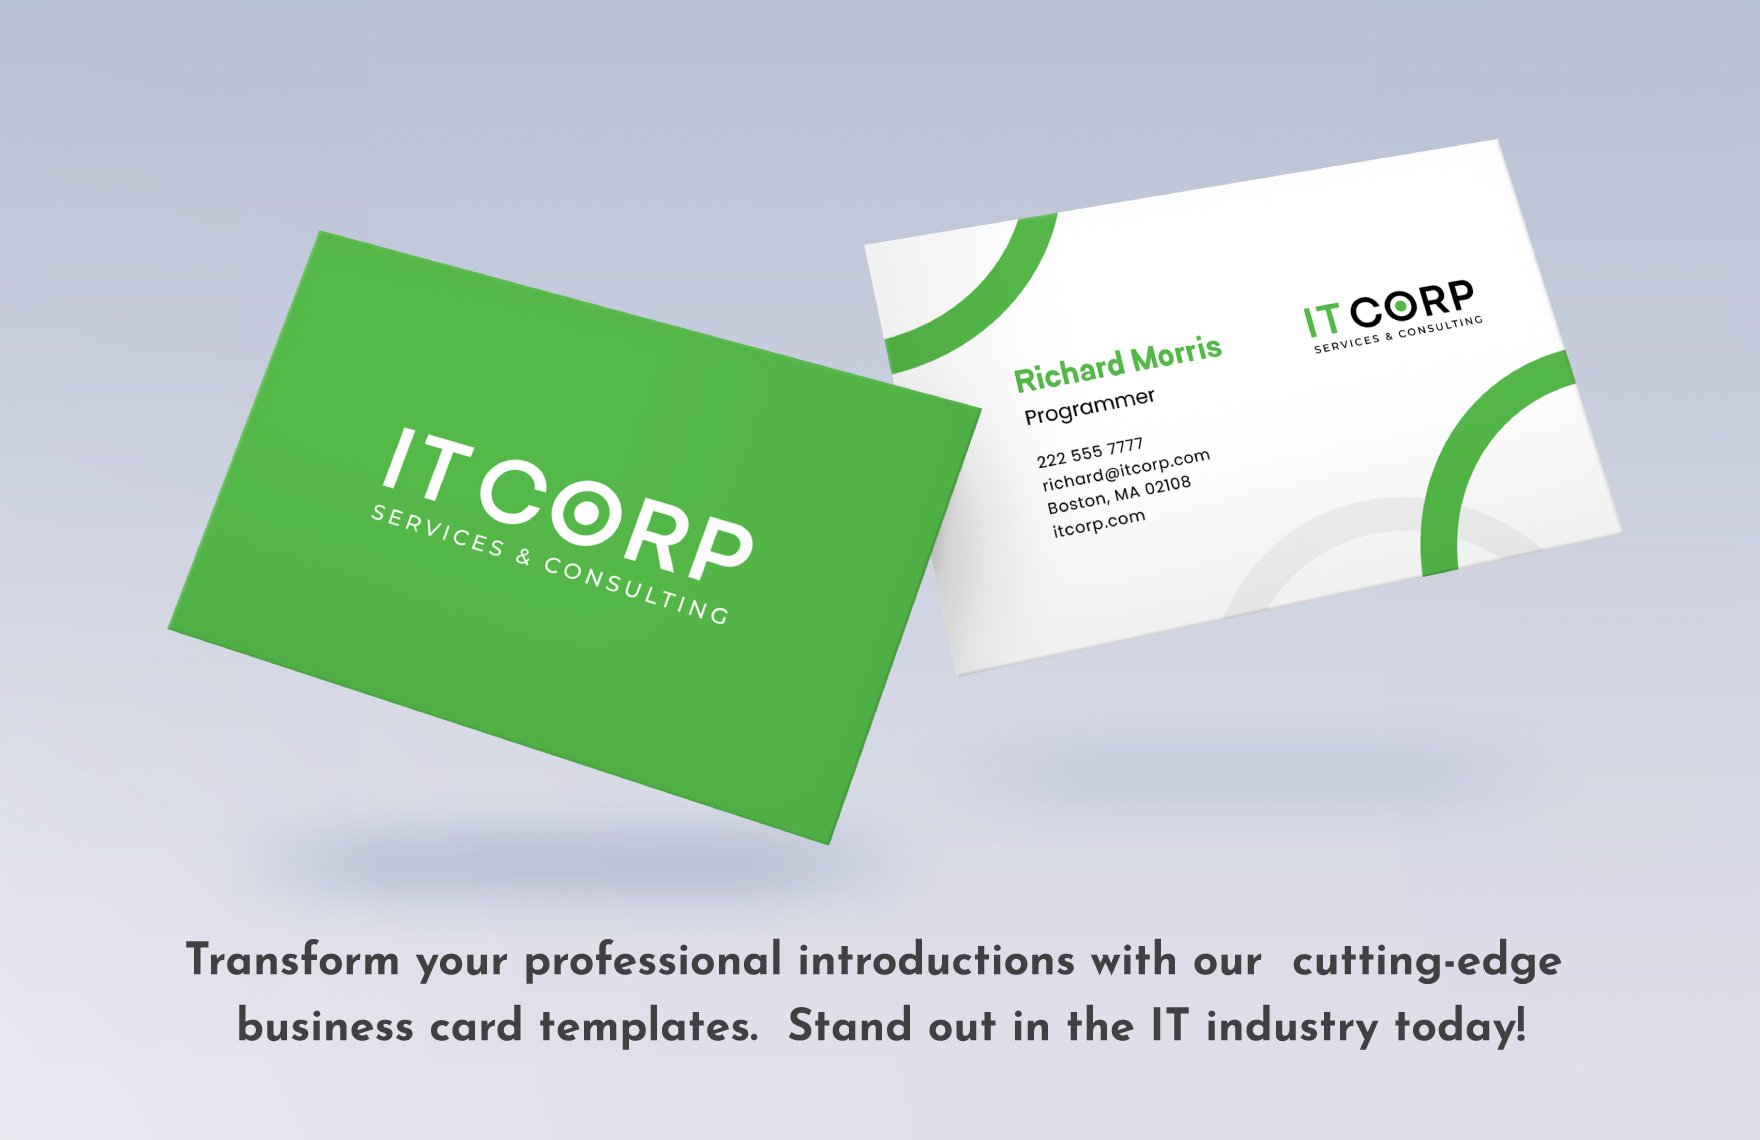 IT ERP Services & Consulting Business Card Template